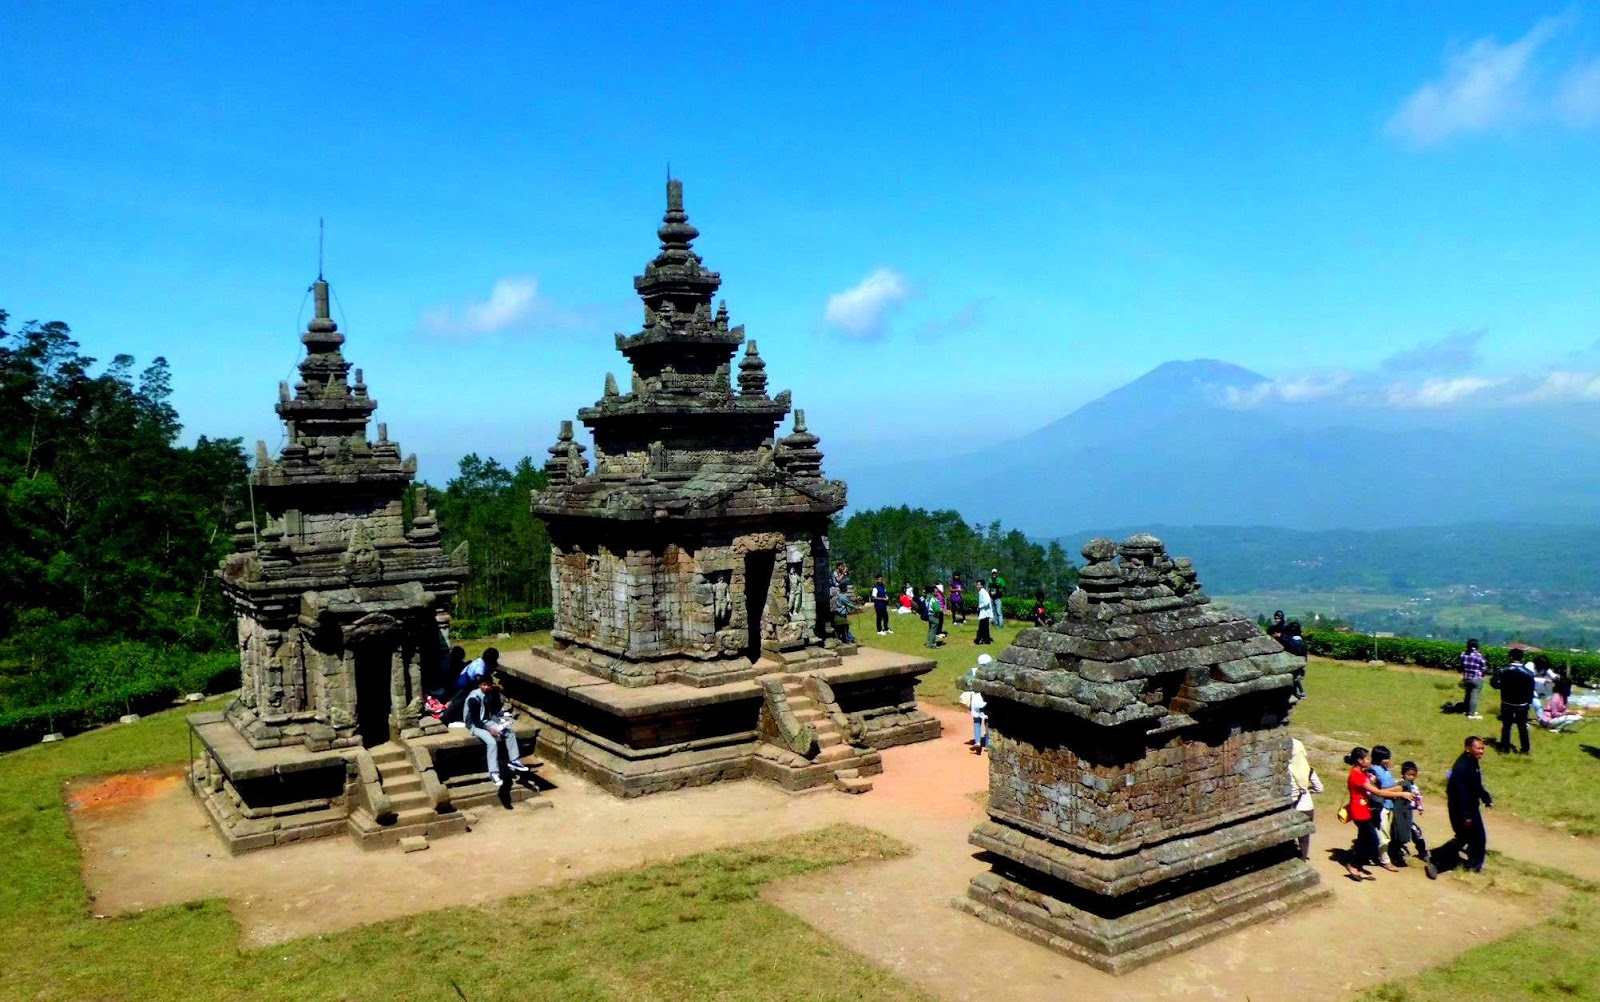 Capture the Breathtakingly Beautiful Gedong Songo Temple